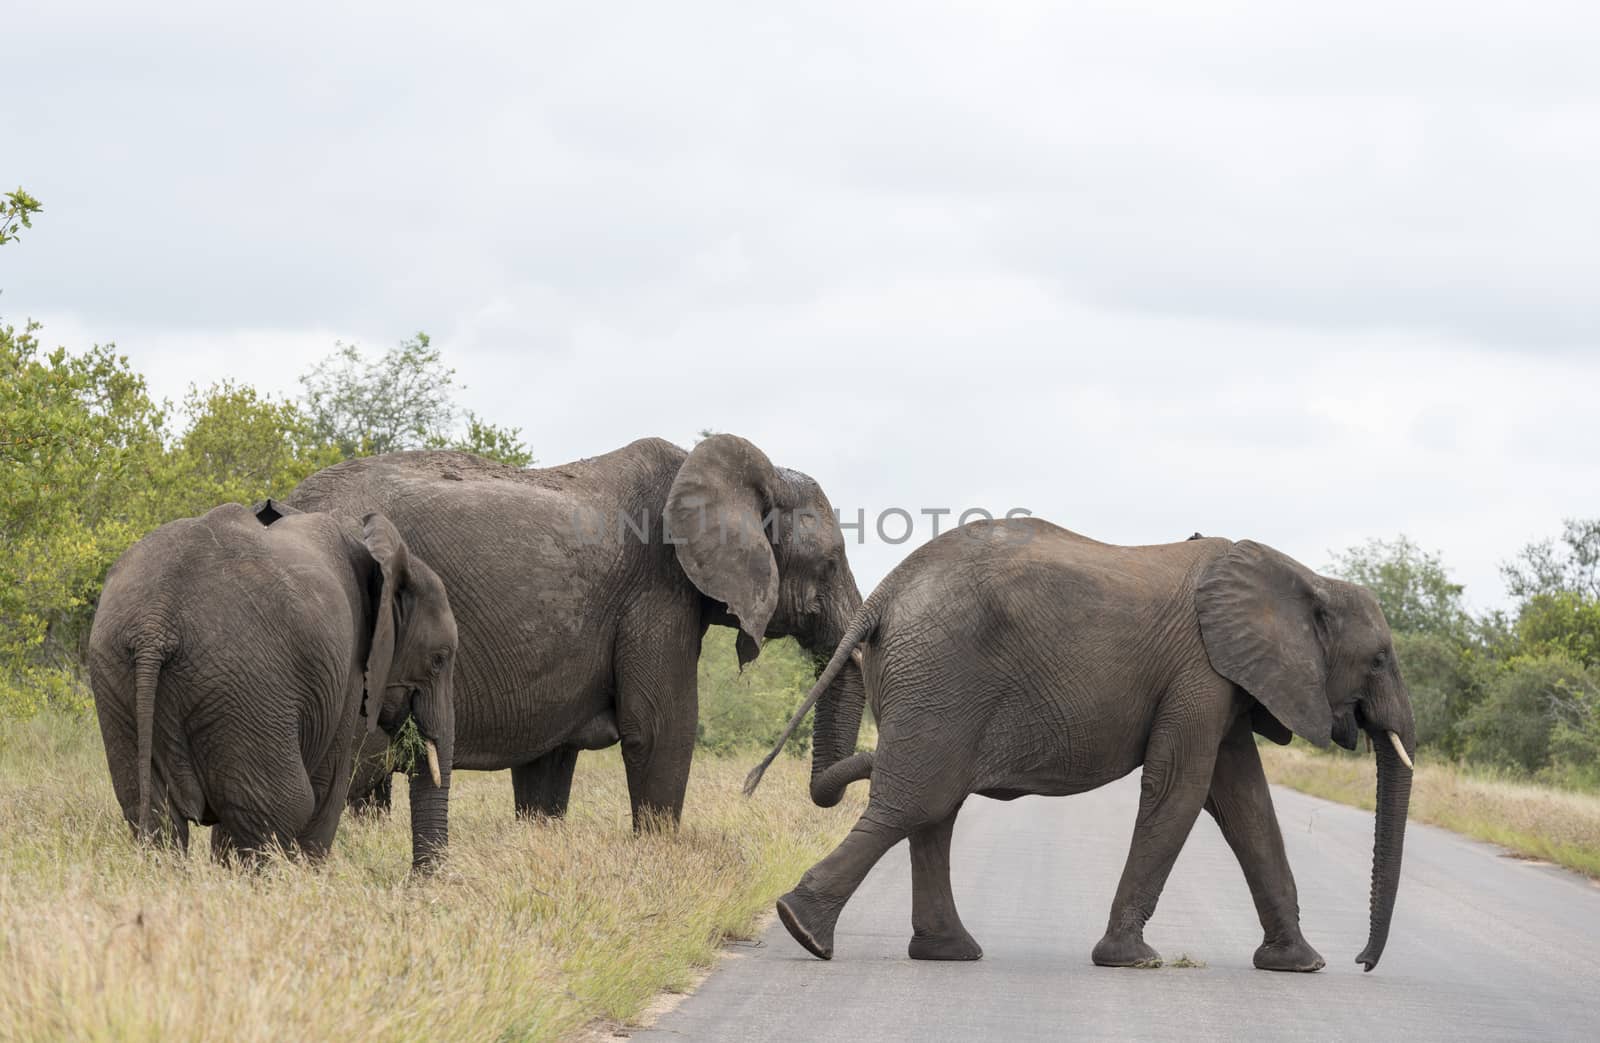 group elephant in kruger park by compuinfoto